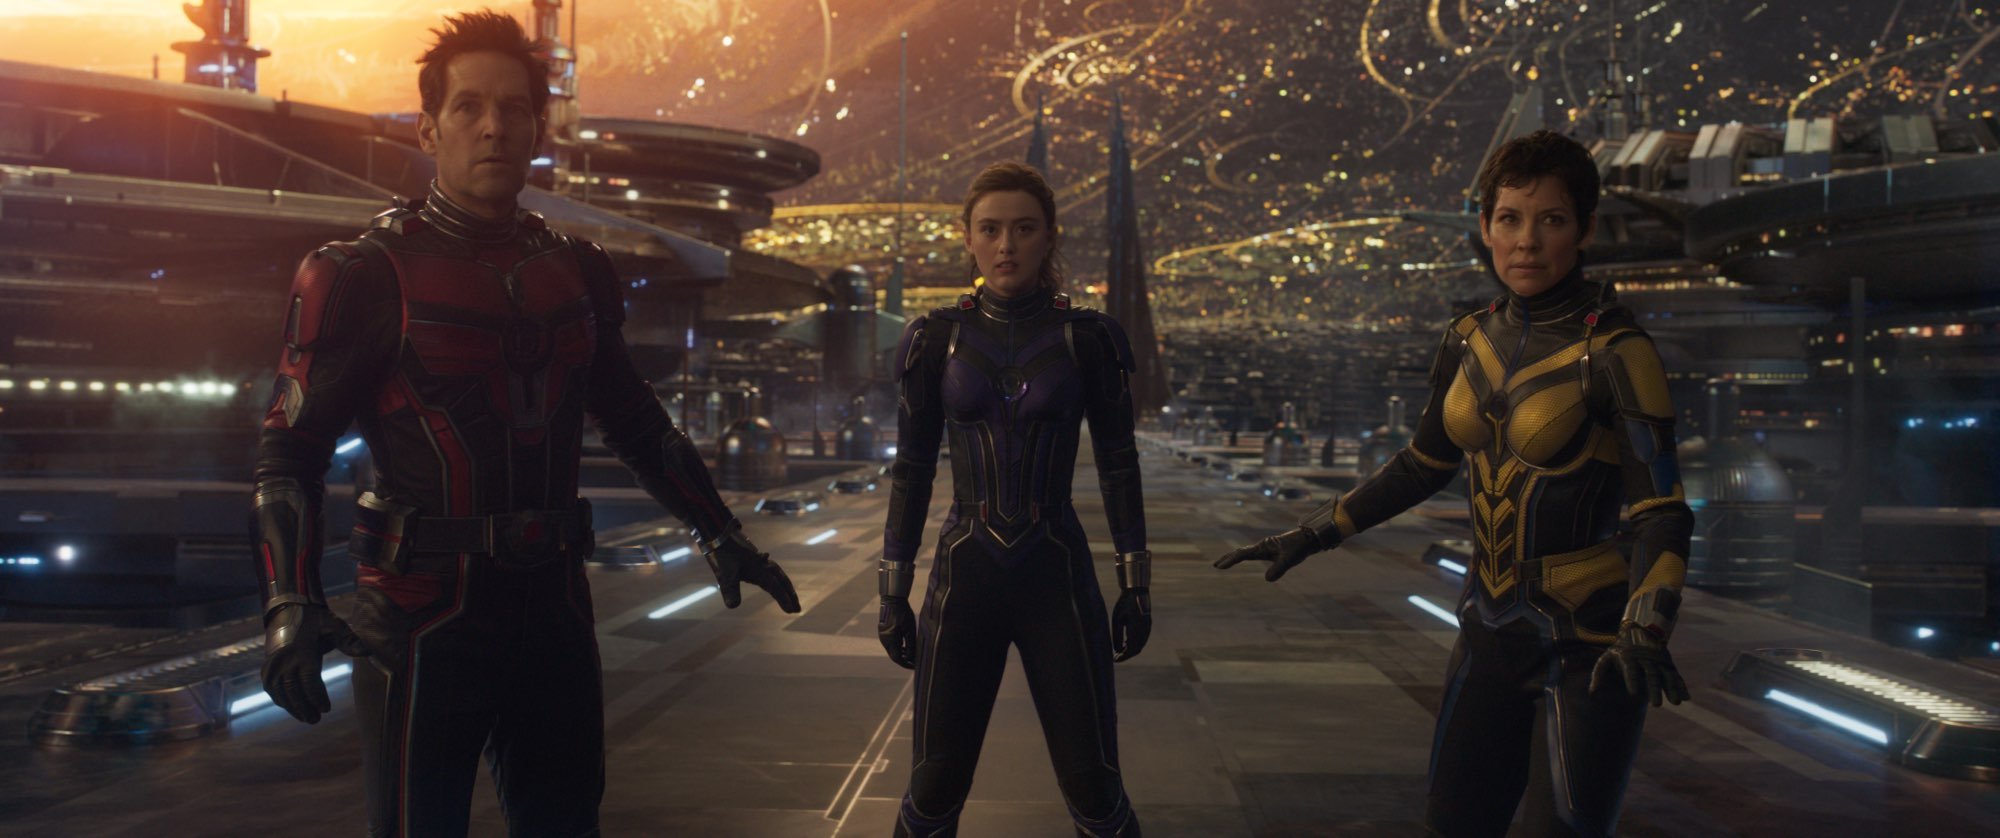 'Ant-Man and the Wasp: Quantumania' Paul Rudd as Scott Lang, Kathryn Newton as Cassie Lang, and Evangeline Lilly as Hope Van Dyne standing on a bridge wearing superhero suits